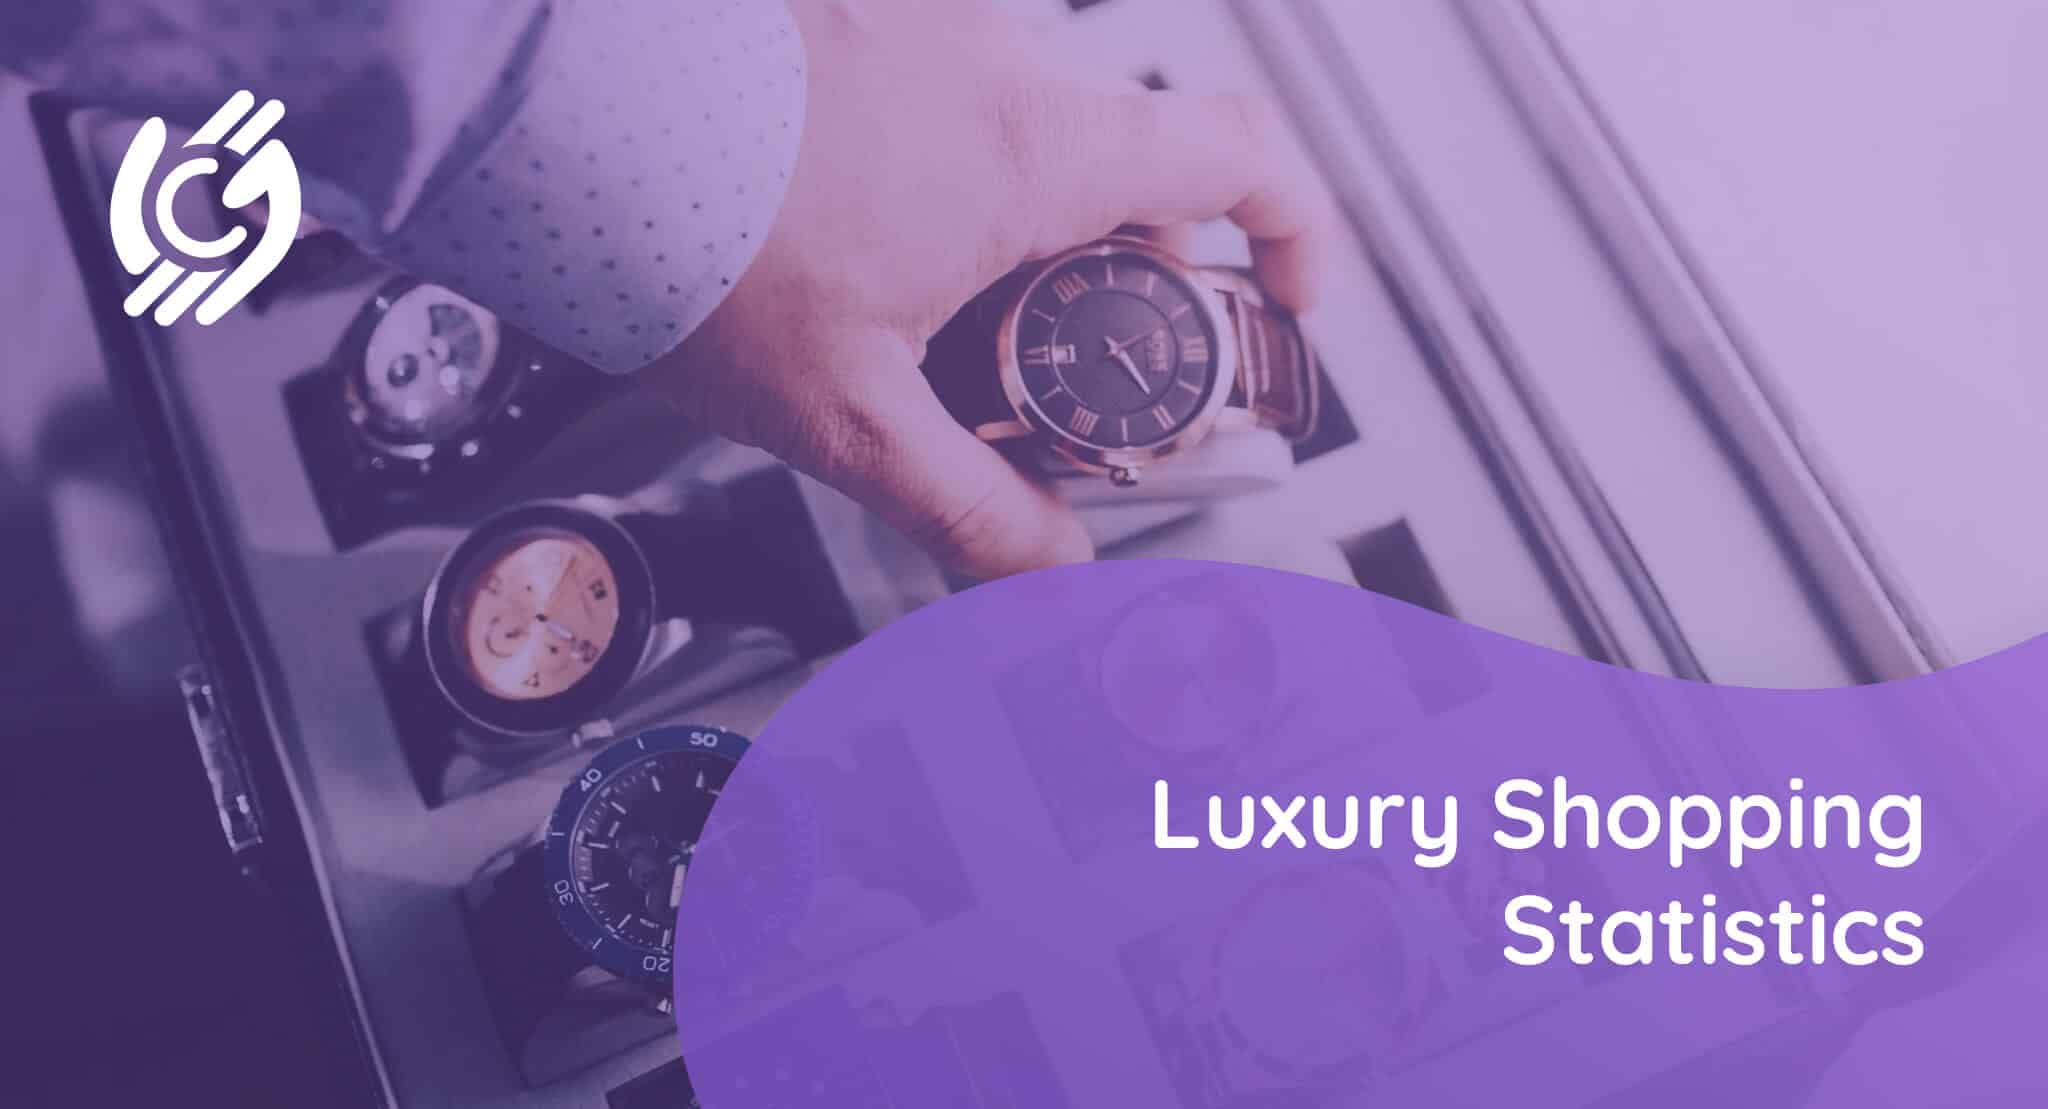 Why are luxury shopper standards rising?